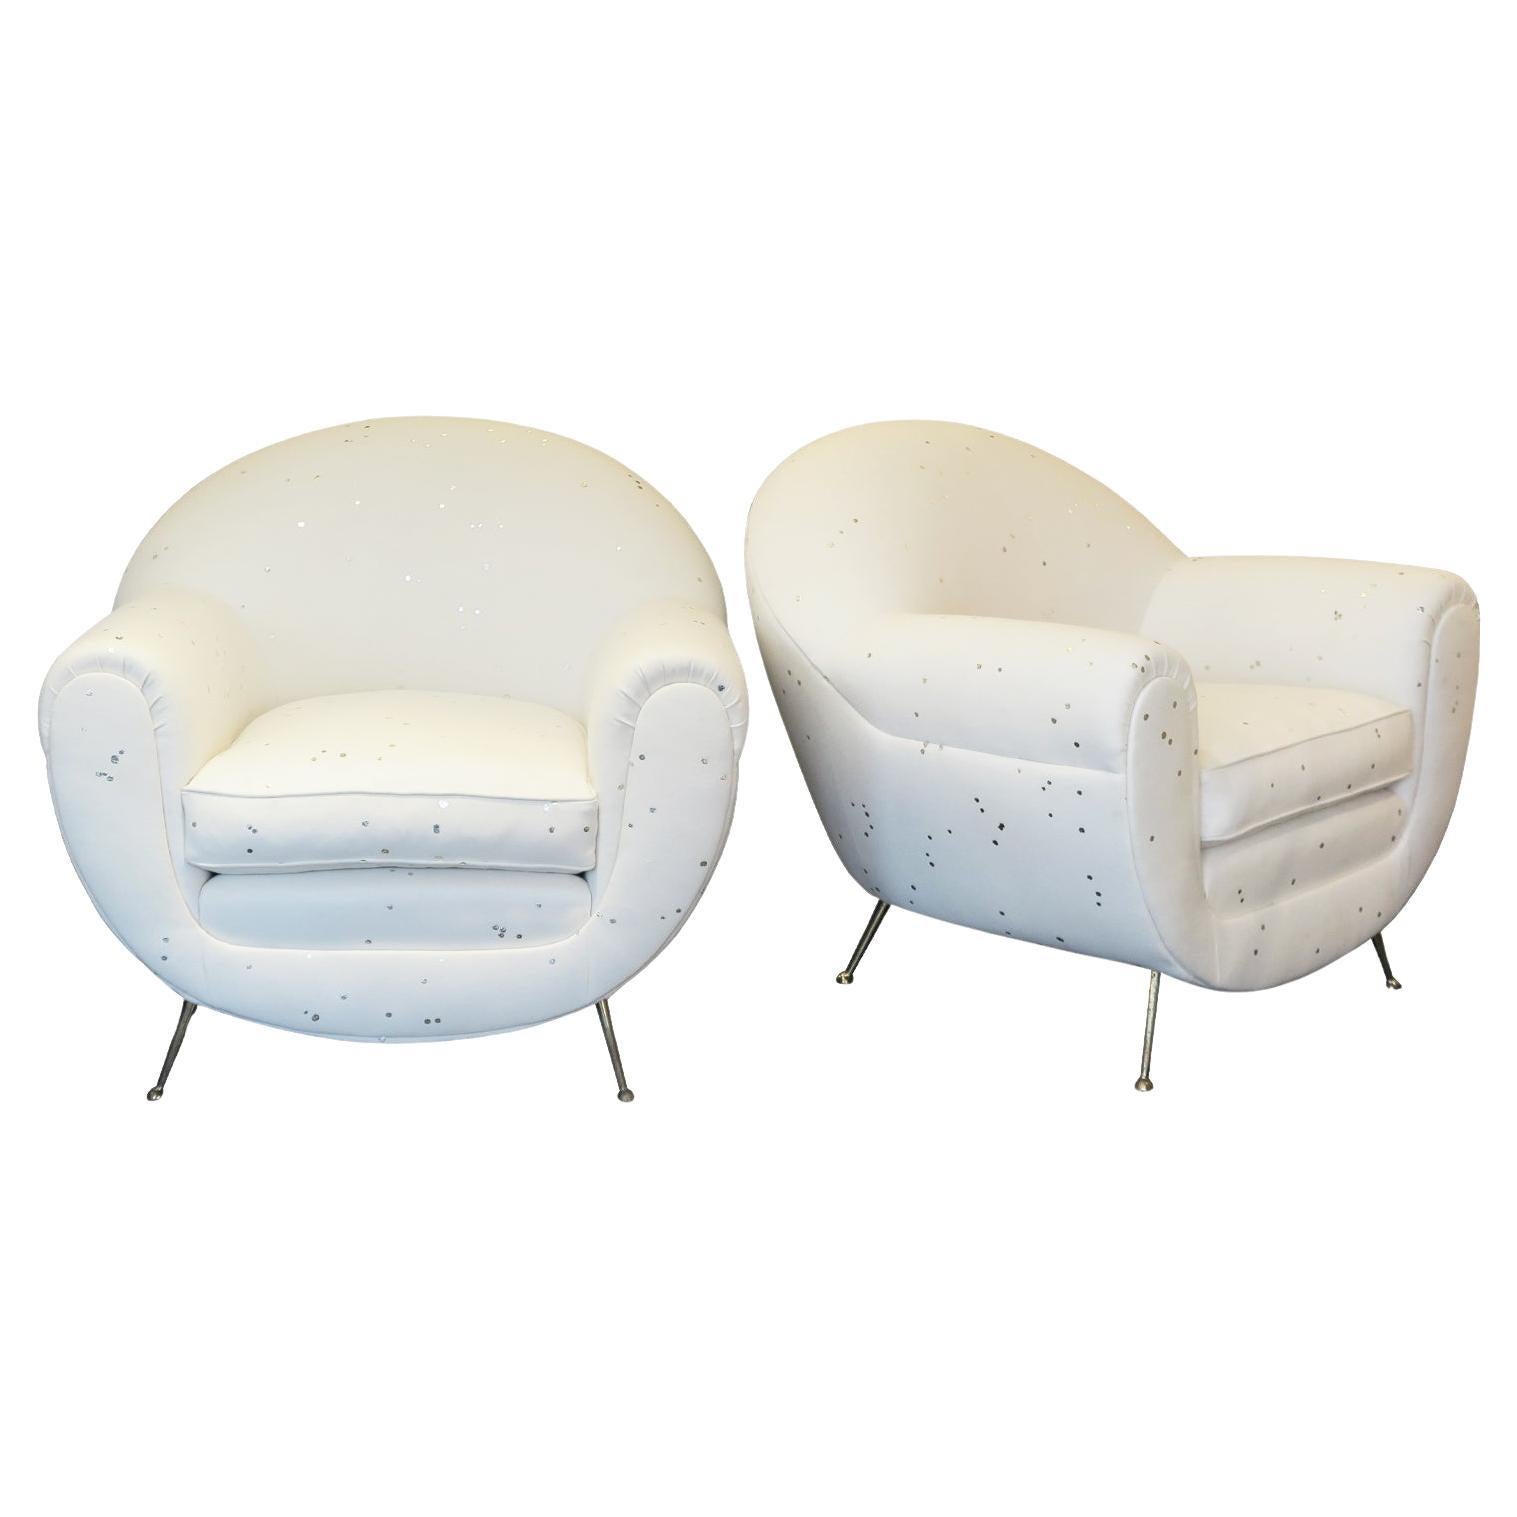 Pair of Italian Mid-Century Lounge Chairs with Rounded Design For Sale